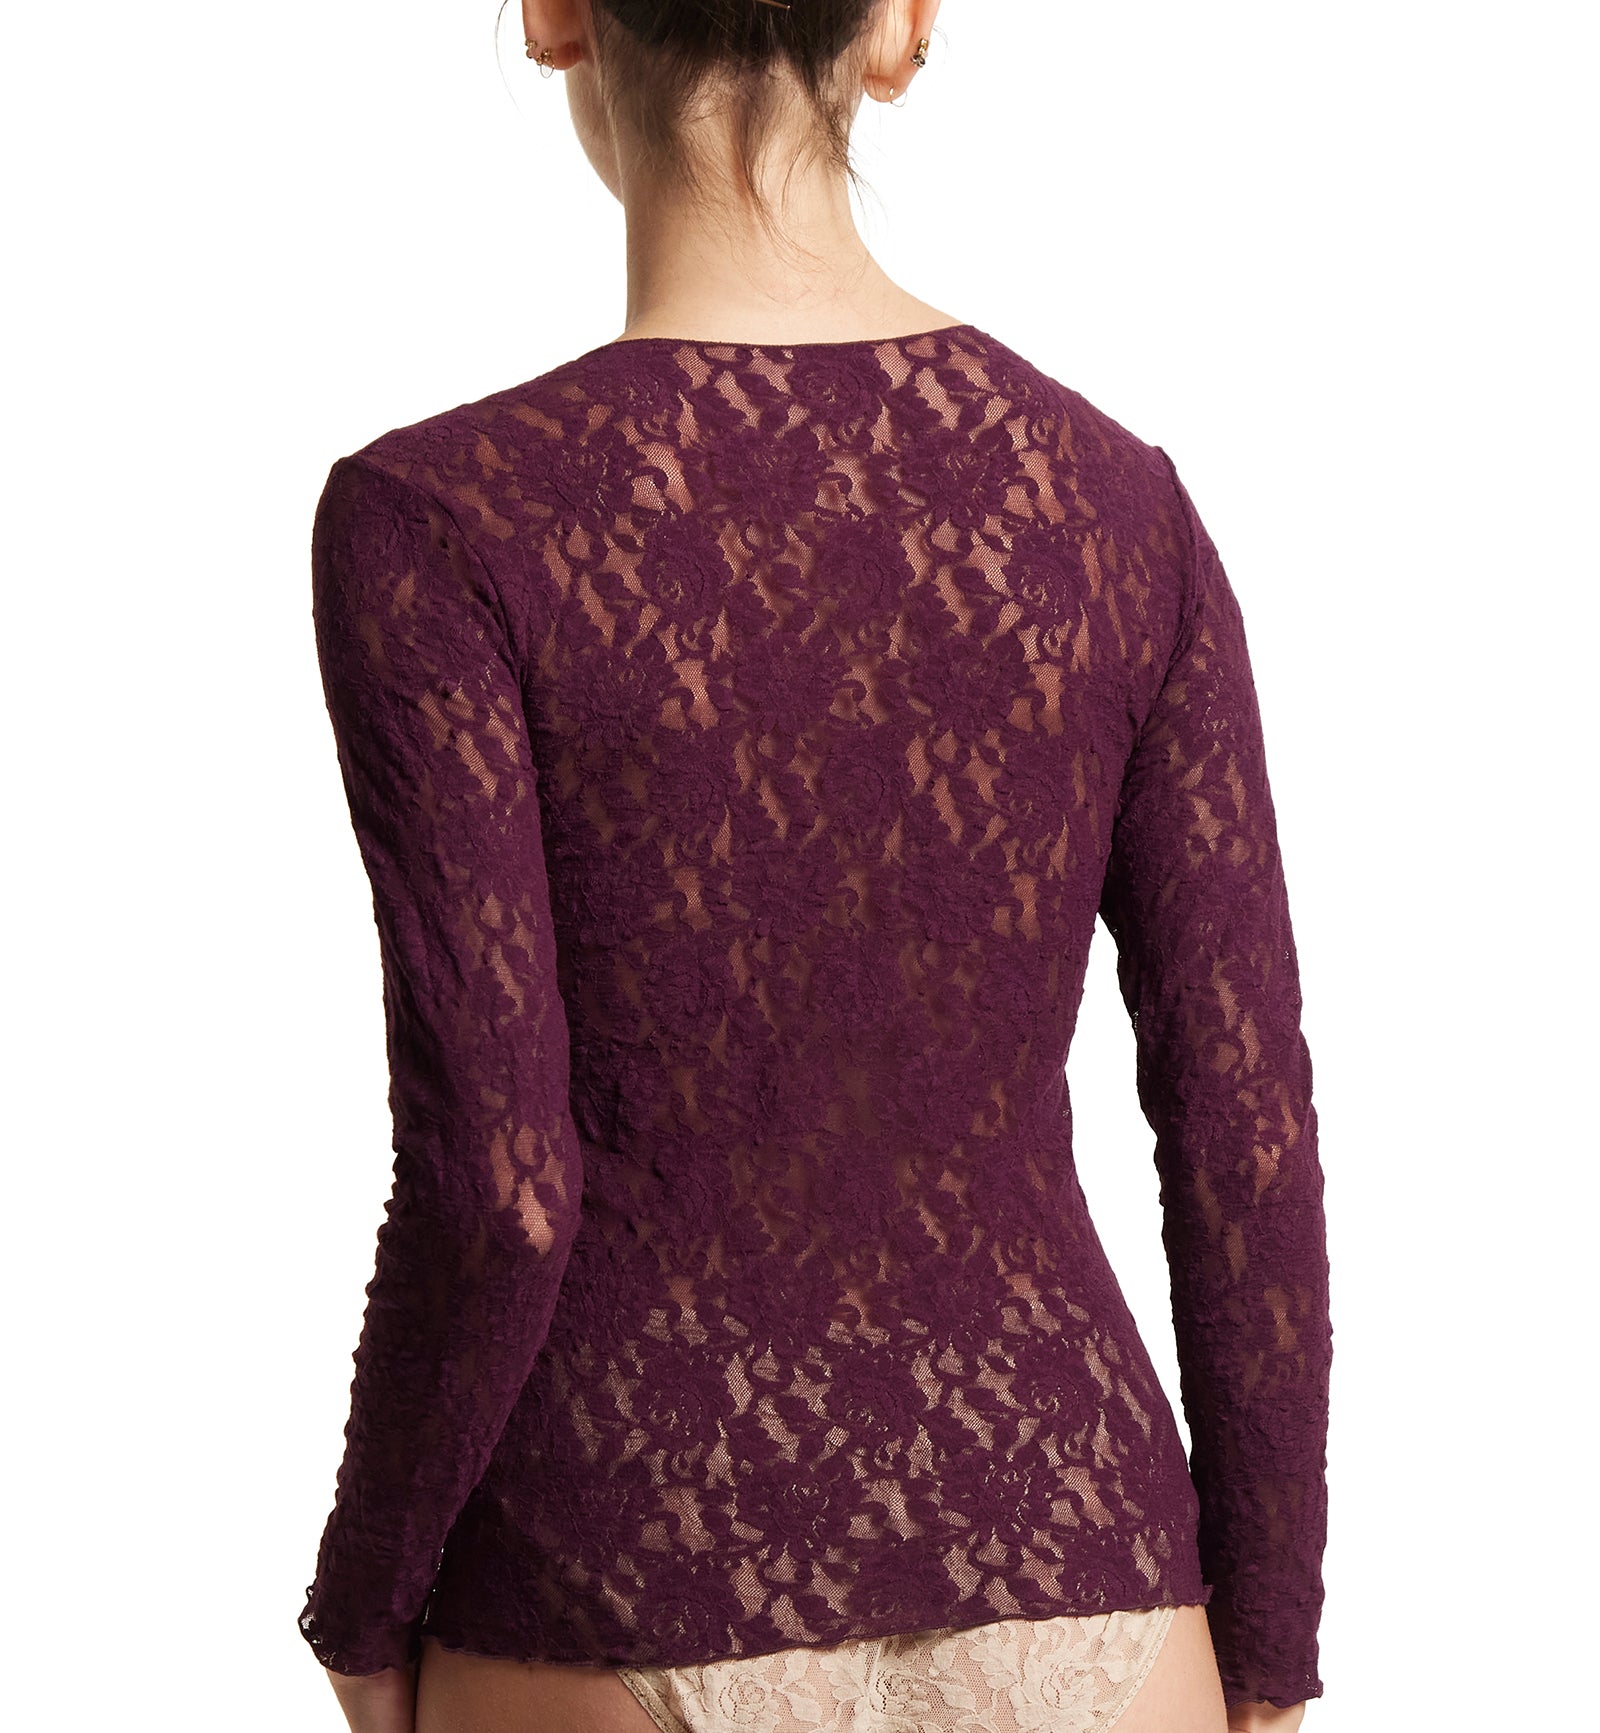 Hanky Panky Signature Lace Unlined Long Sleeve Top (128L),XL,Dried Cherry - Dried Cherry,Large